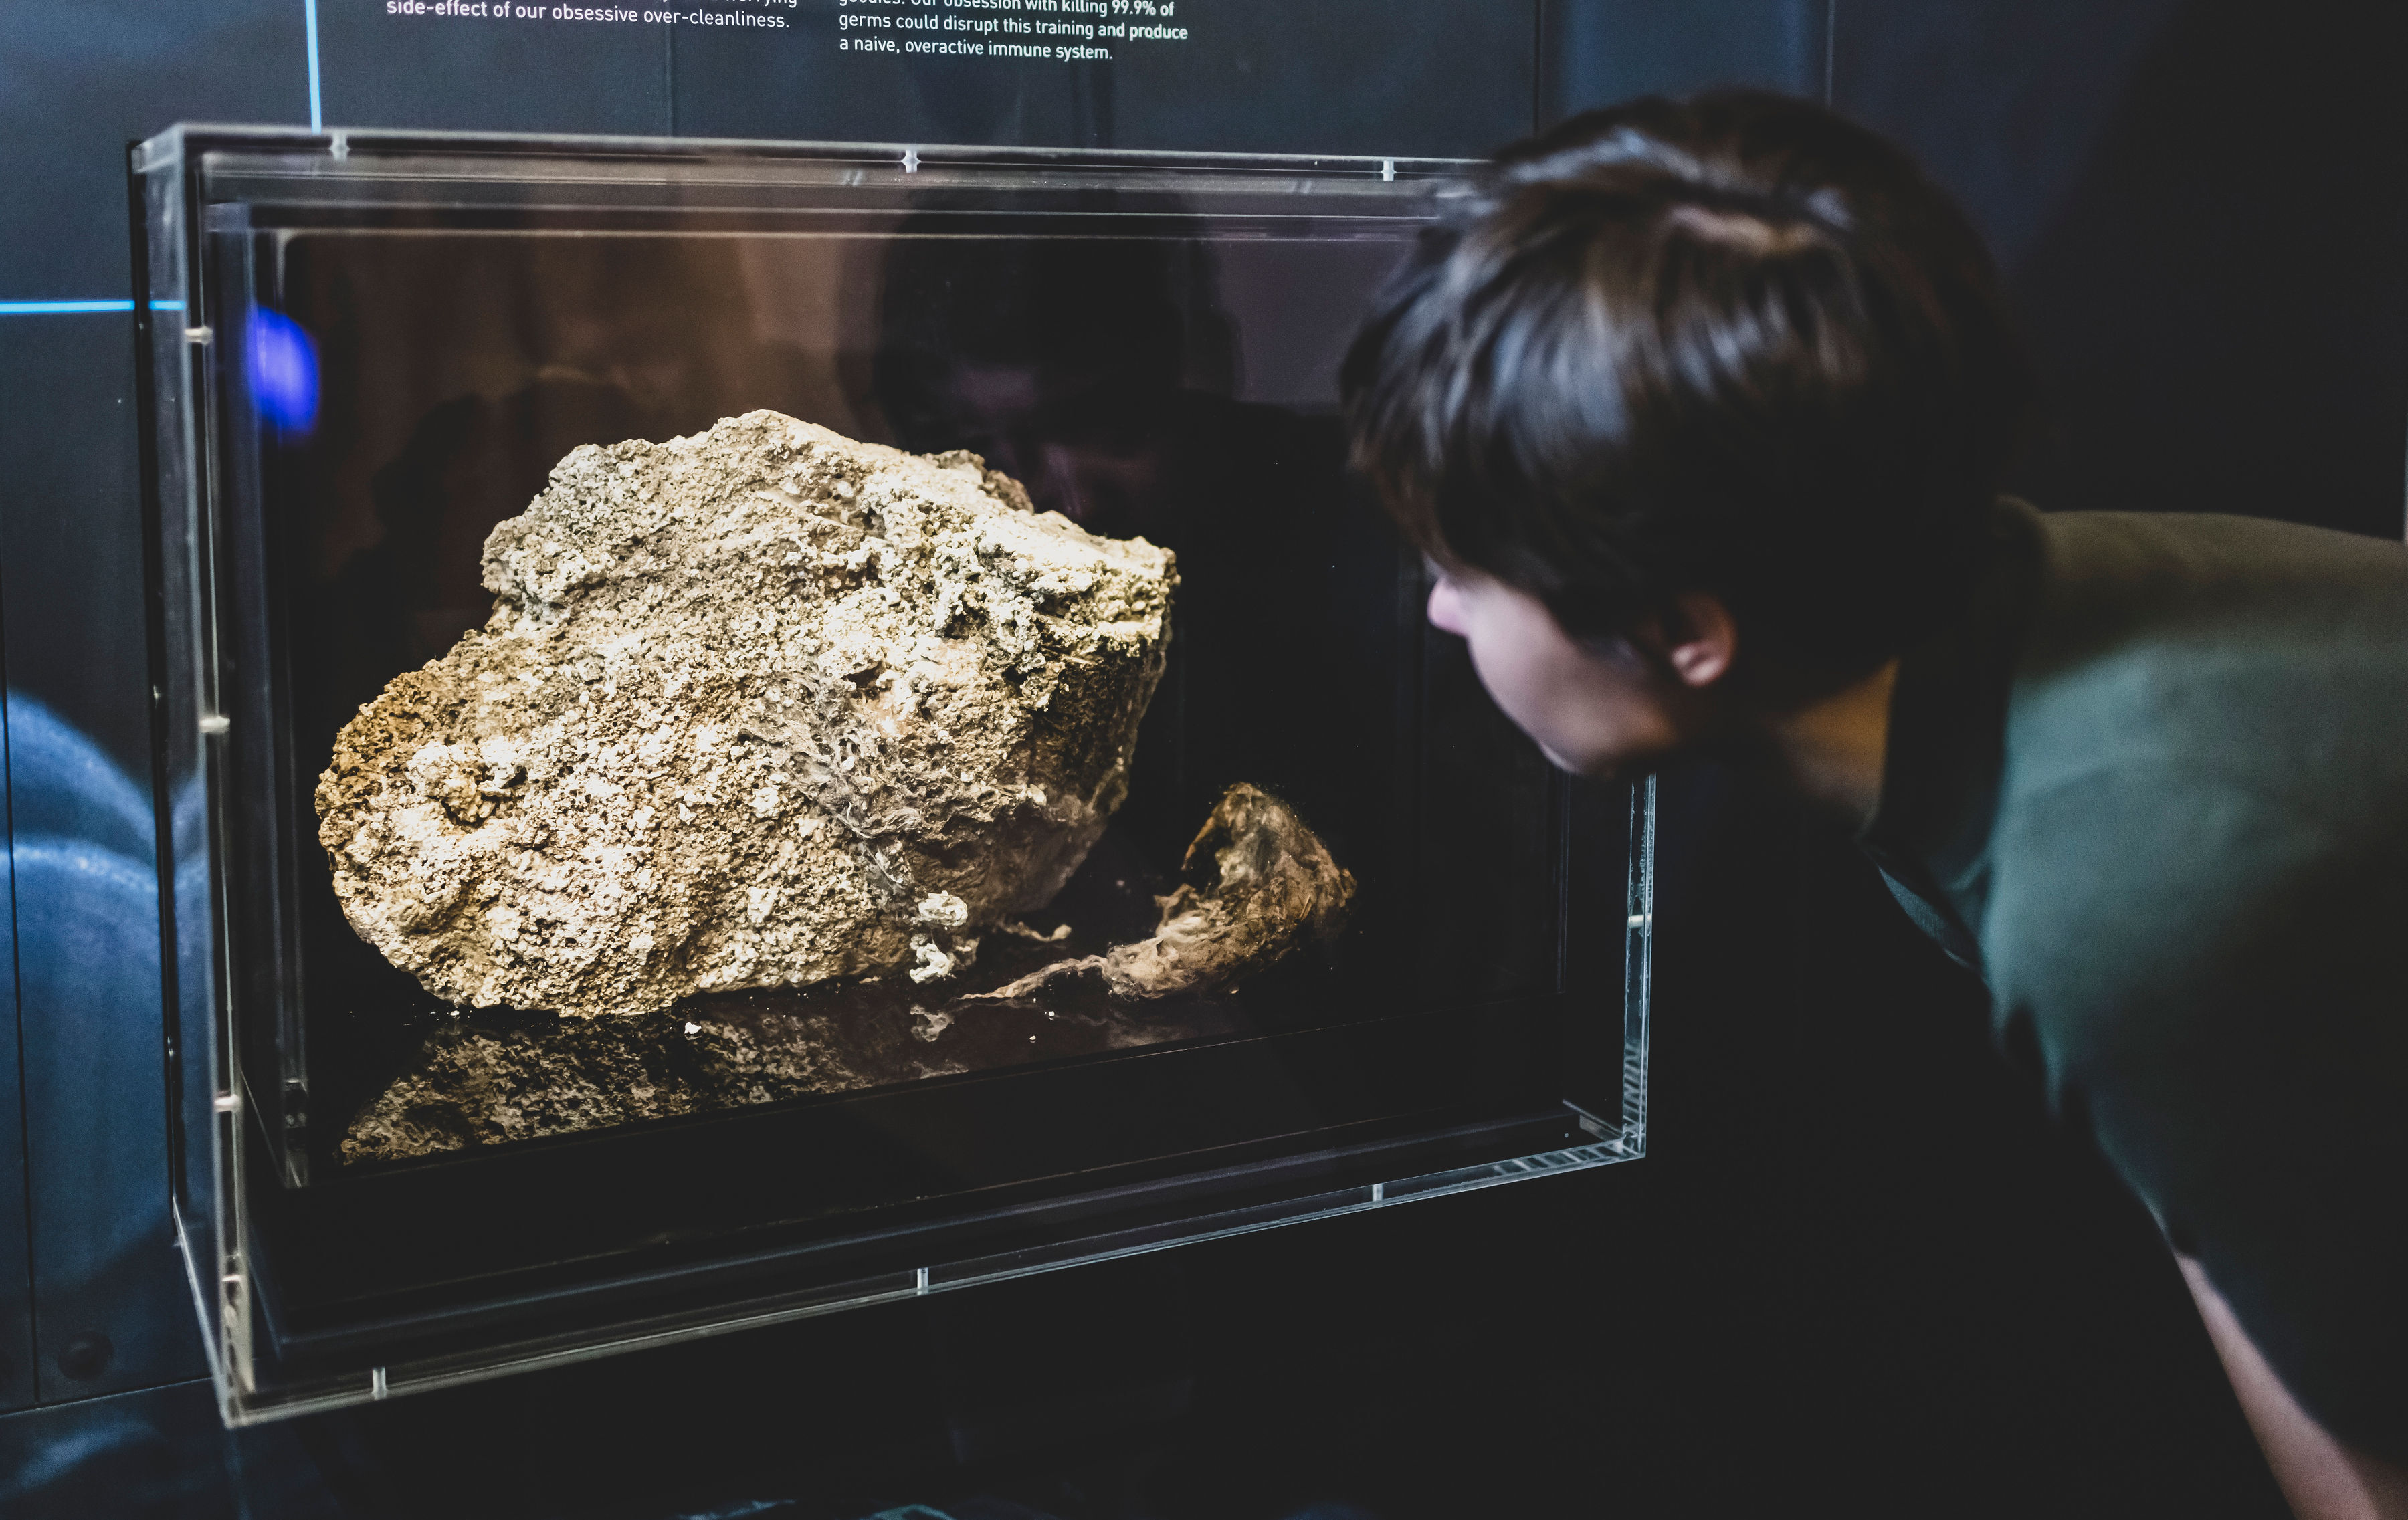 Image of a fatberg on display in the Melbourne Museum. Credit: Copyright Museums Victoria, Photographer: Rob Zugaro